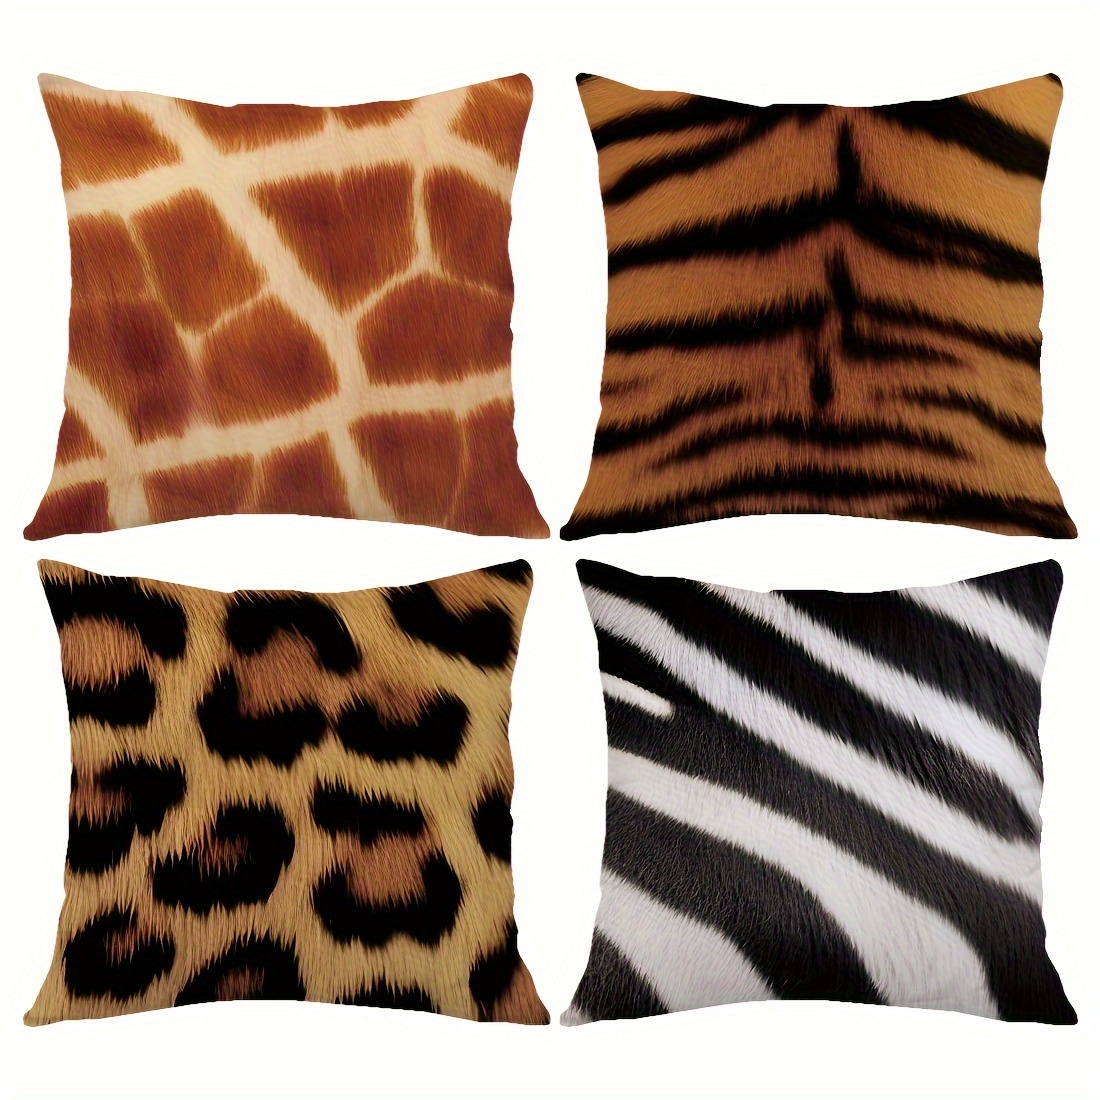 

4pcs, Double-sided Four-piece Set Peach Leather Throw Pillow Cover - Simulation Animal Pattern Series Home Comfortable Pillow Cover Living Room Bedroom Sofa Cushion Cover